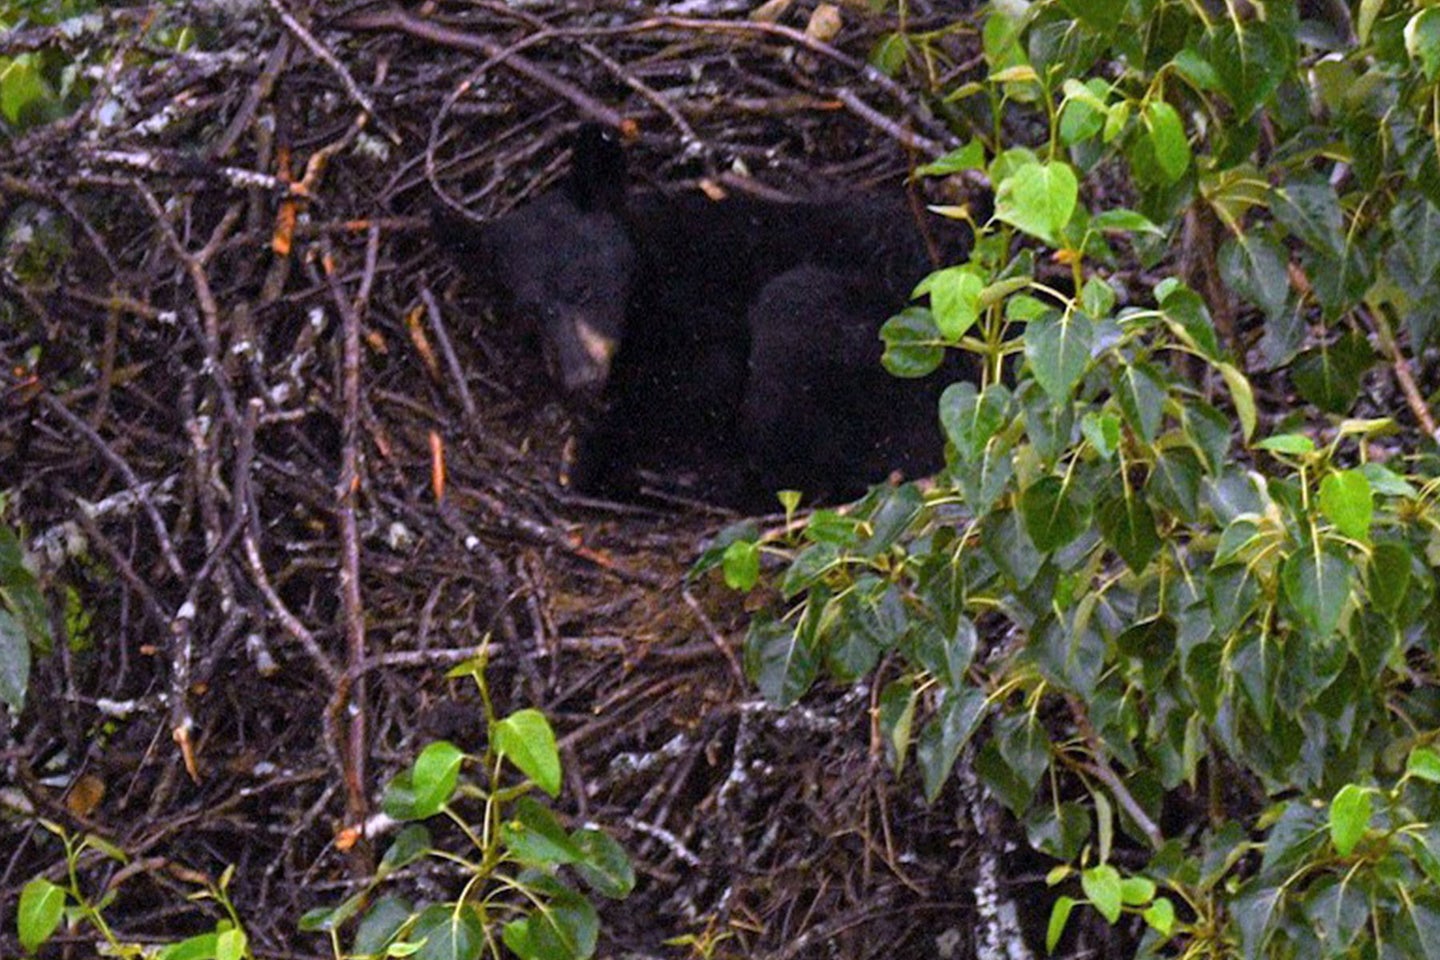 There are an estimated 100,000 black bears in the state of Alaska.